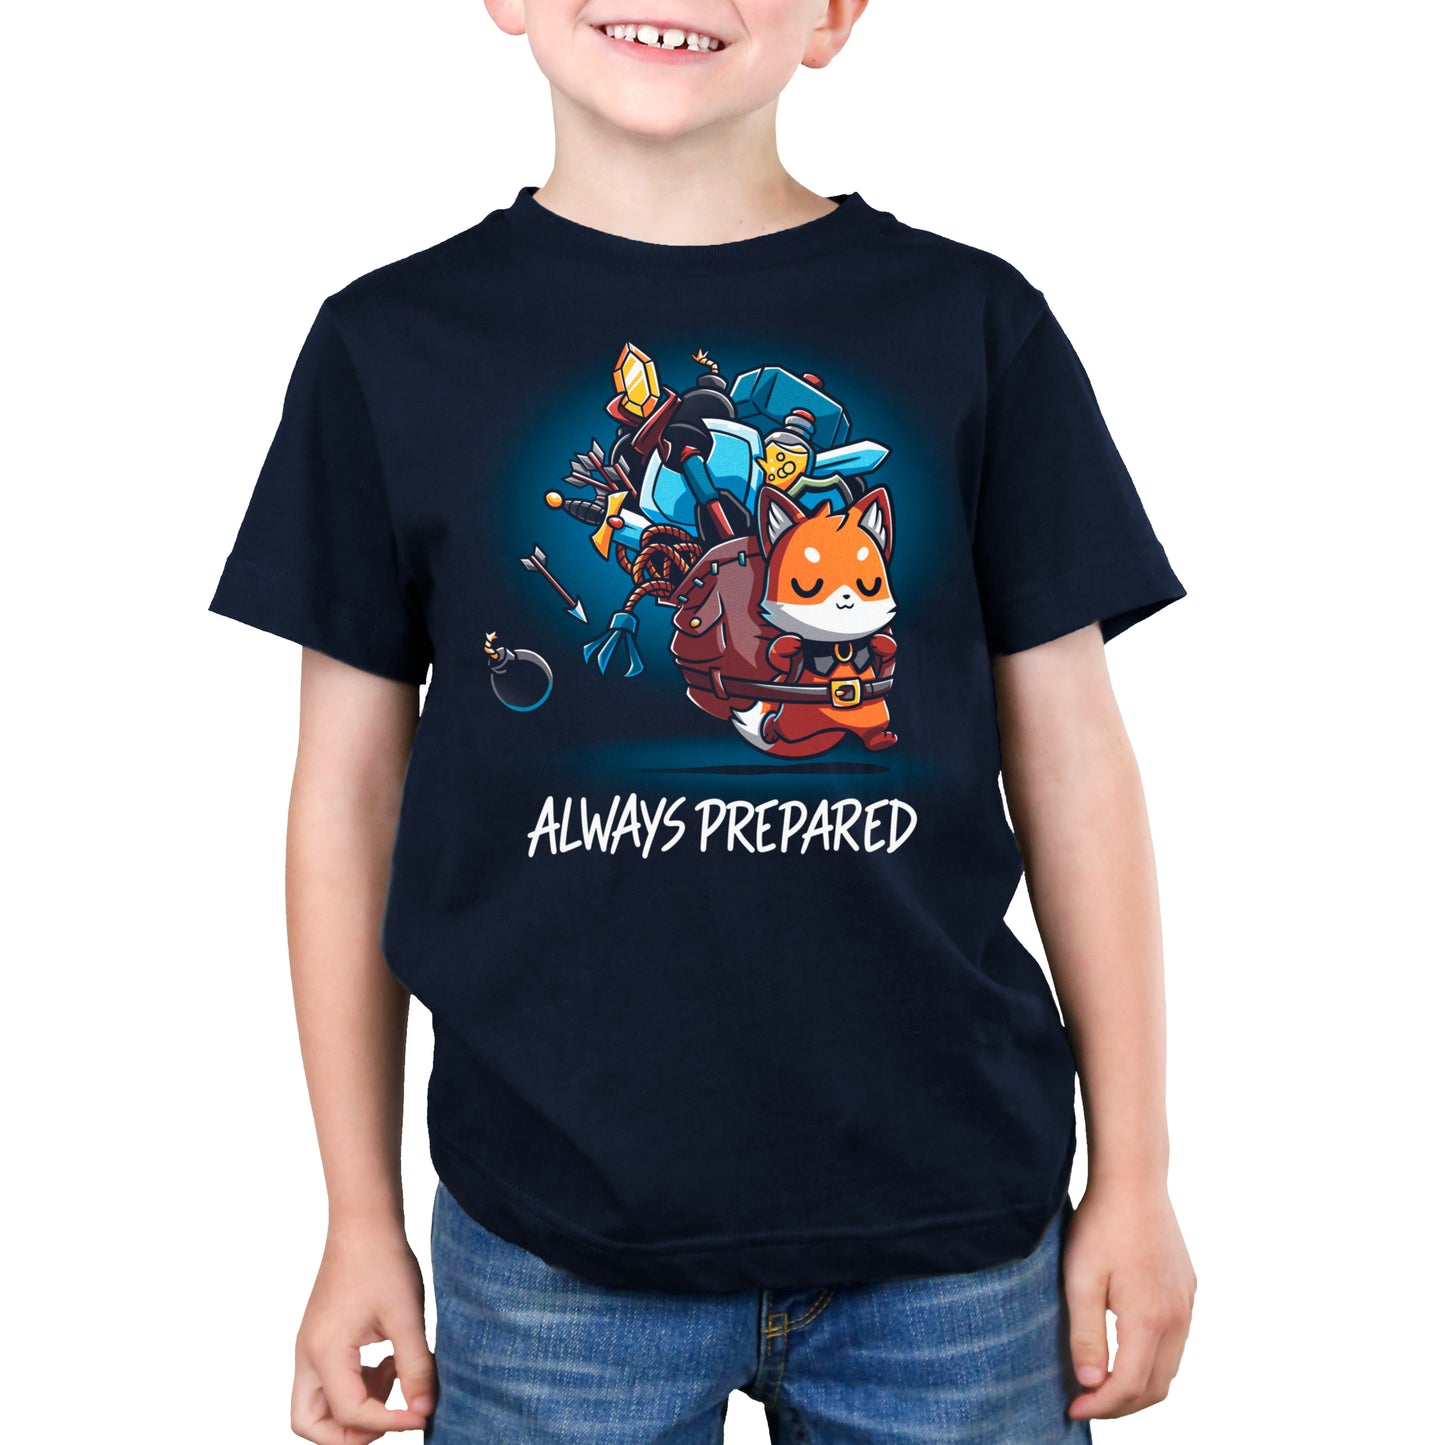 A boy wearing a Navy Blue t-shirt that says TeeTurtle.